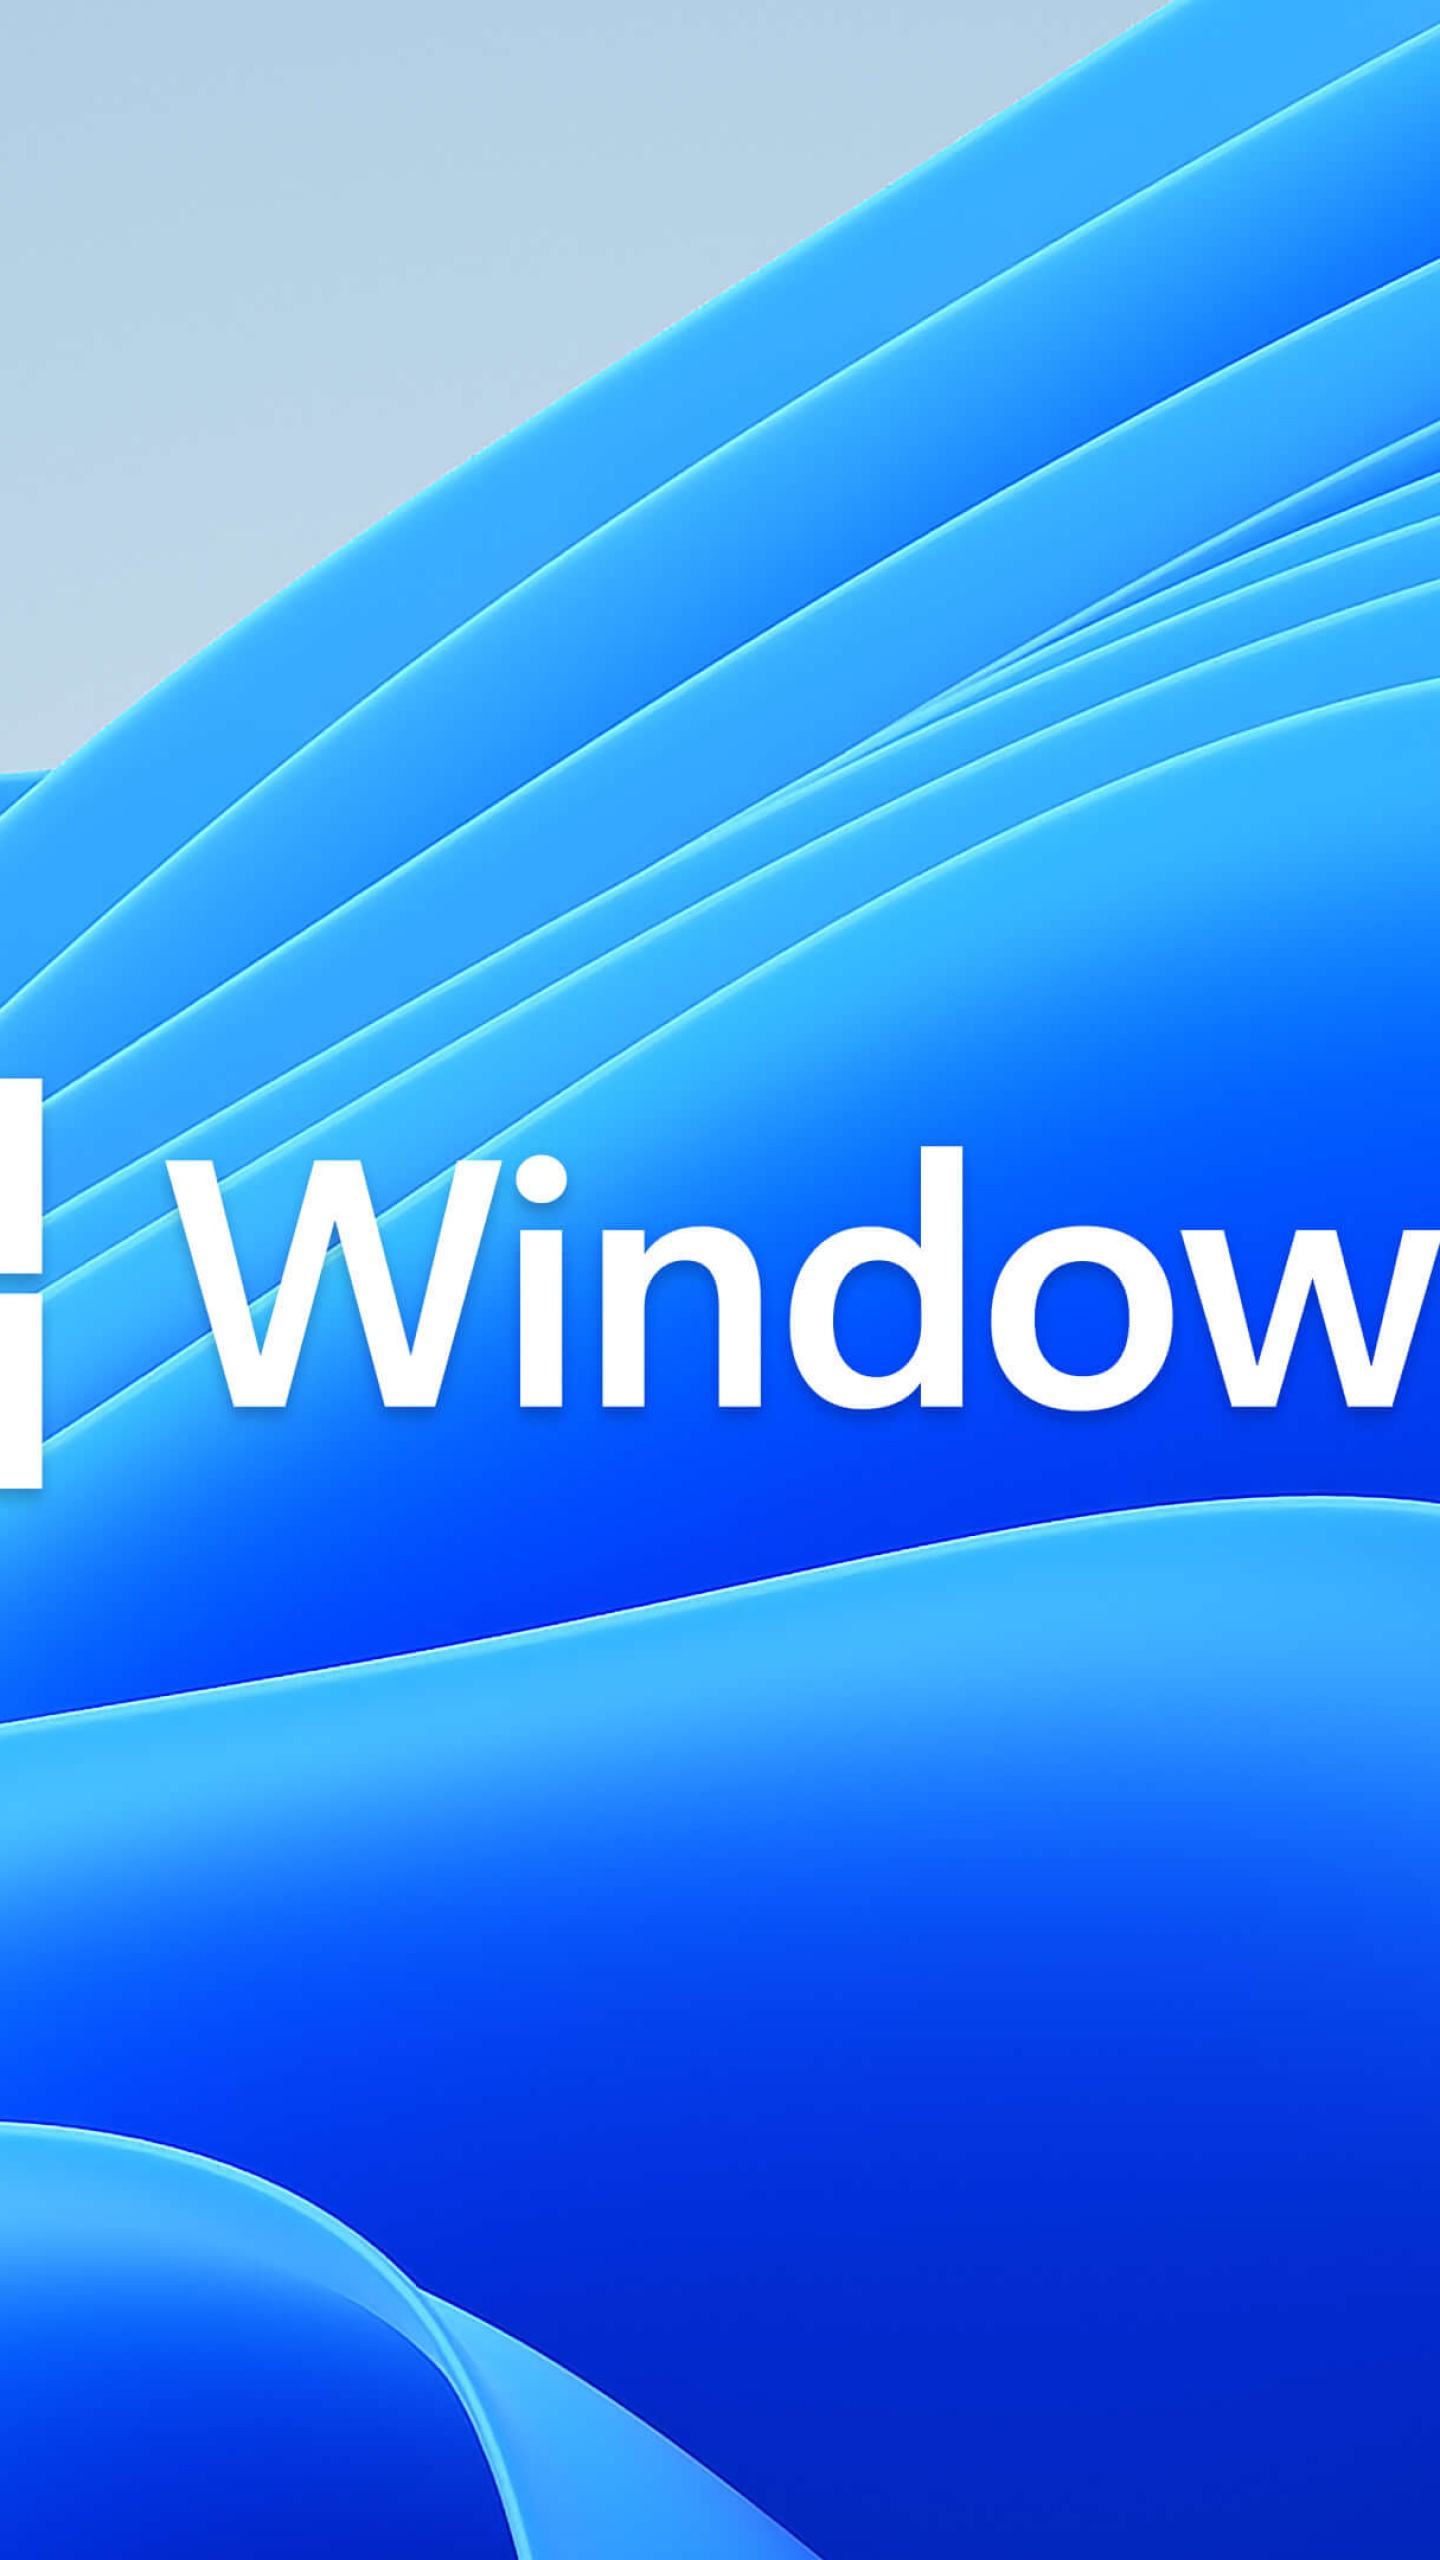 Windows 11 Wallpaper 4K, Stock, Official, Blue background, Abstract